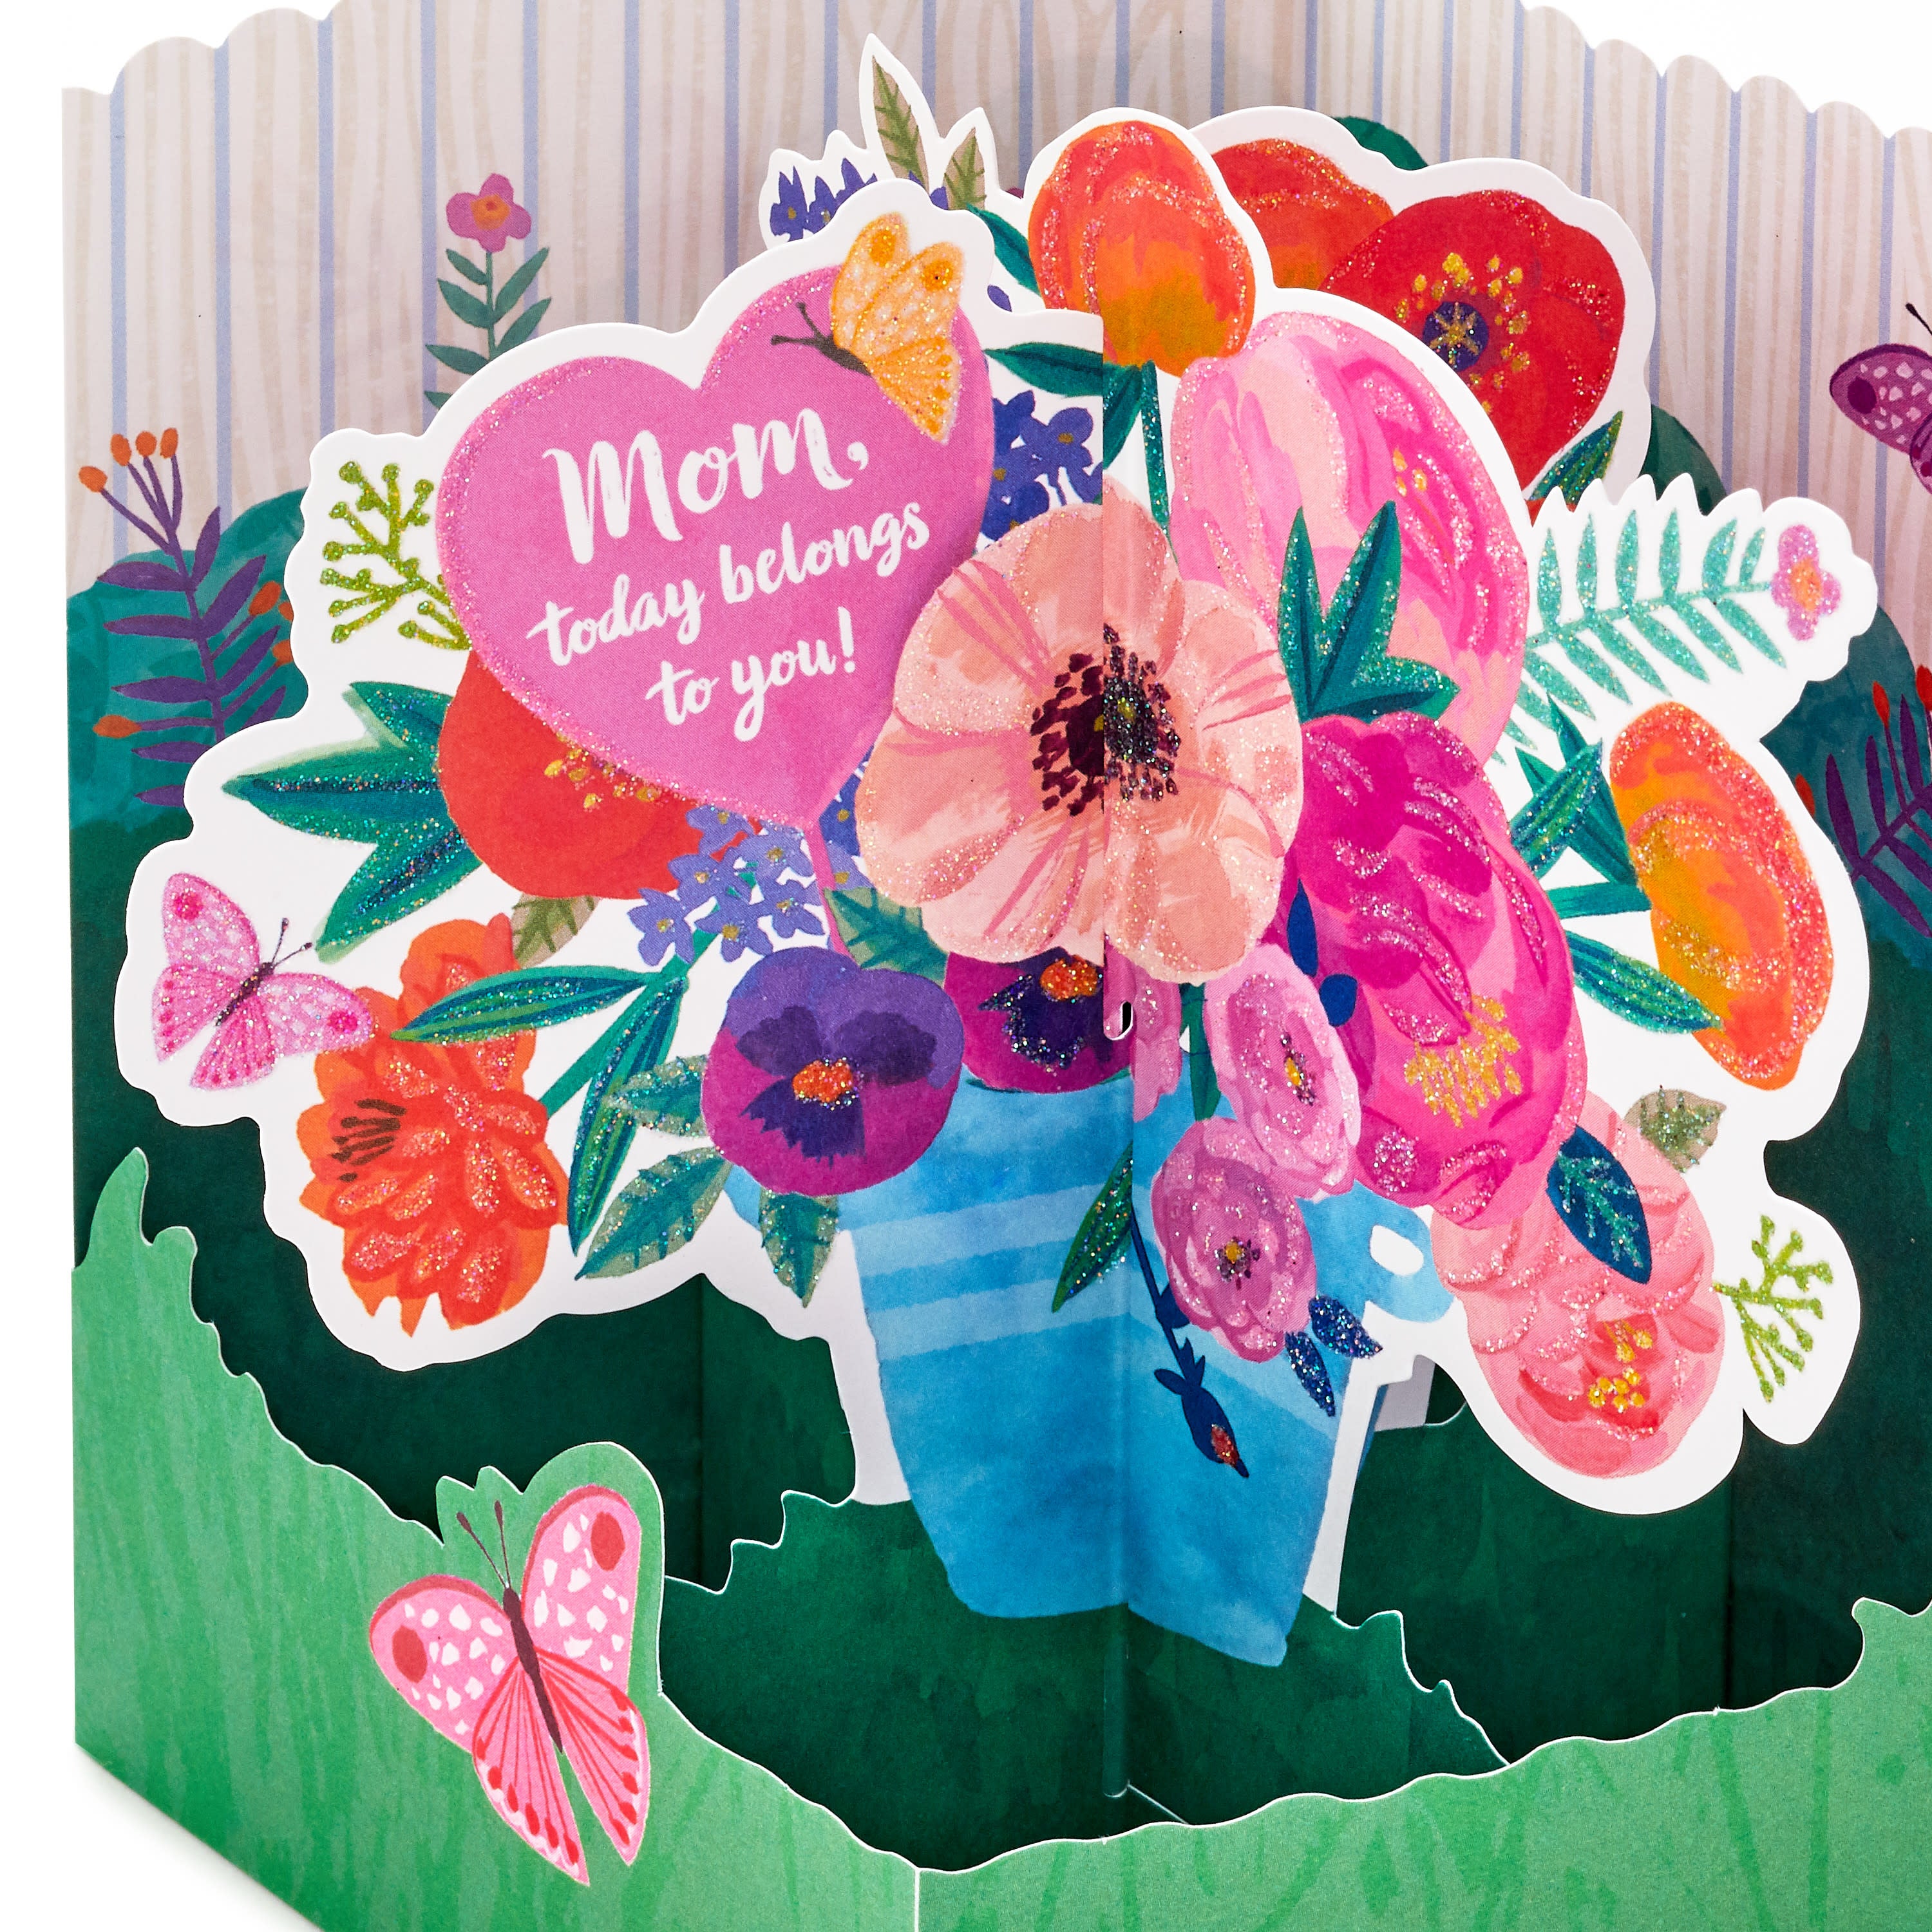 Hallmark Paper Wonder Displayable Pop Up Mothers Day Card for Mom (Pot of Flowers)